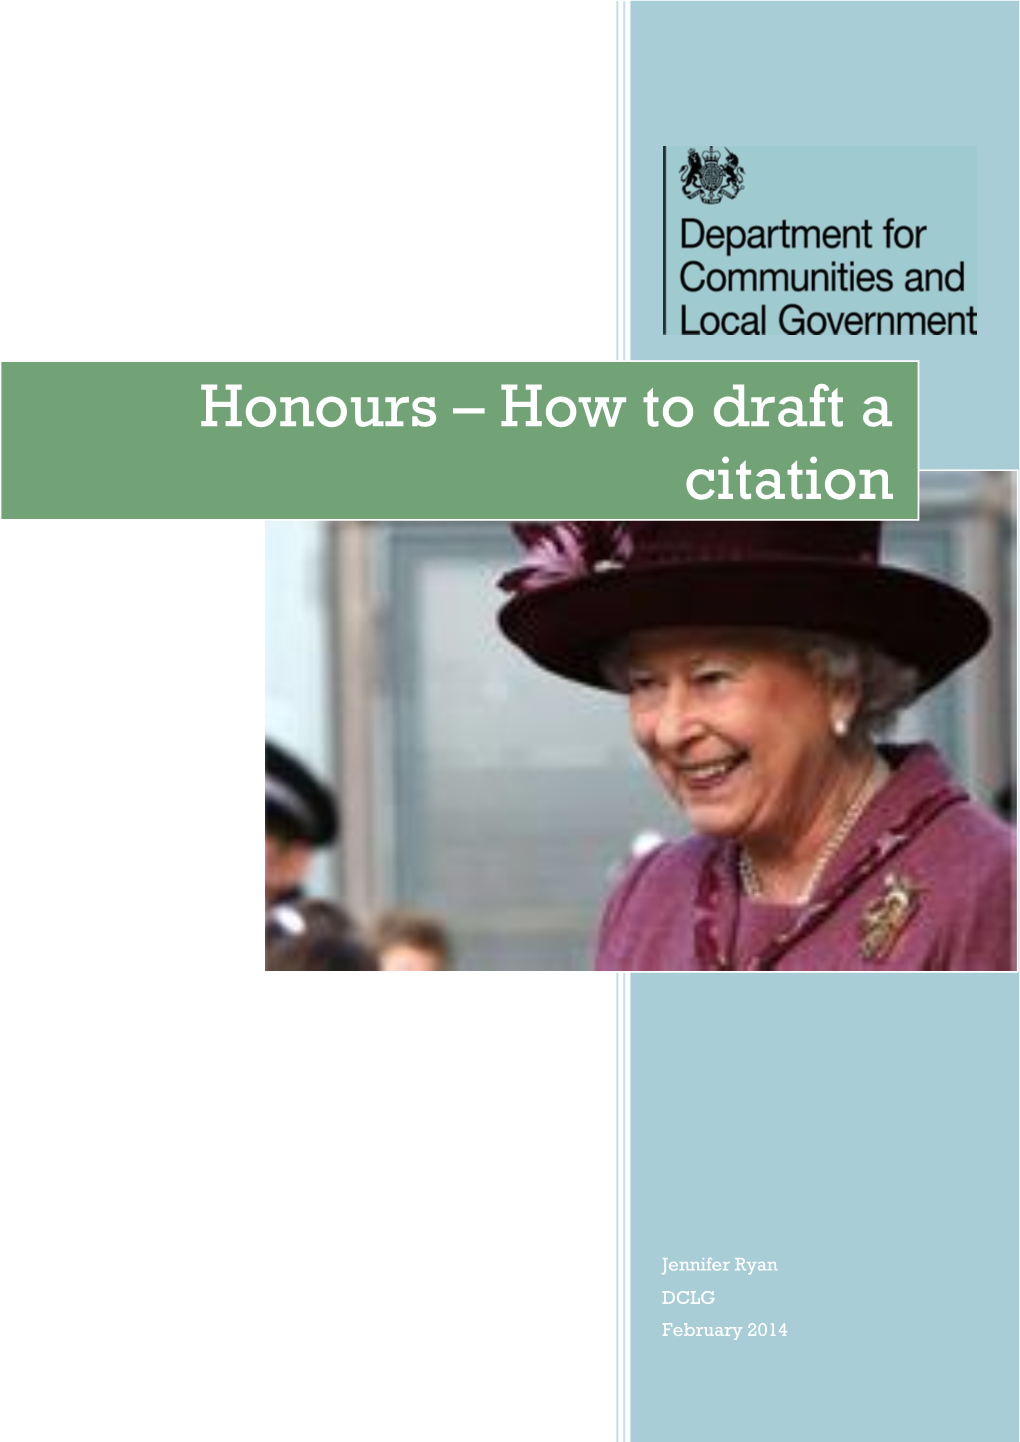 Honours – How to Draft a Citation